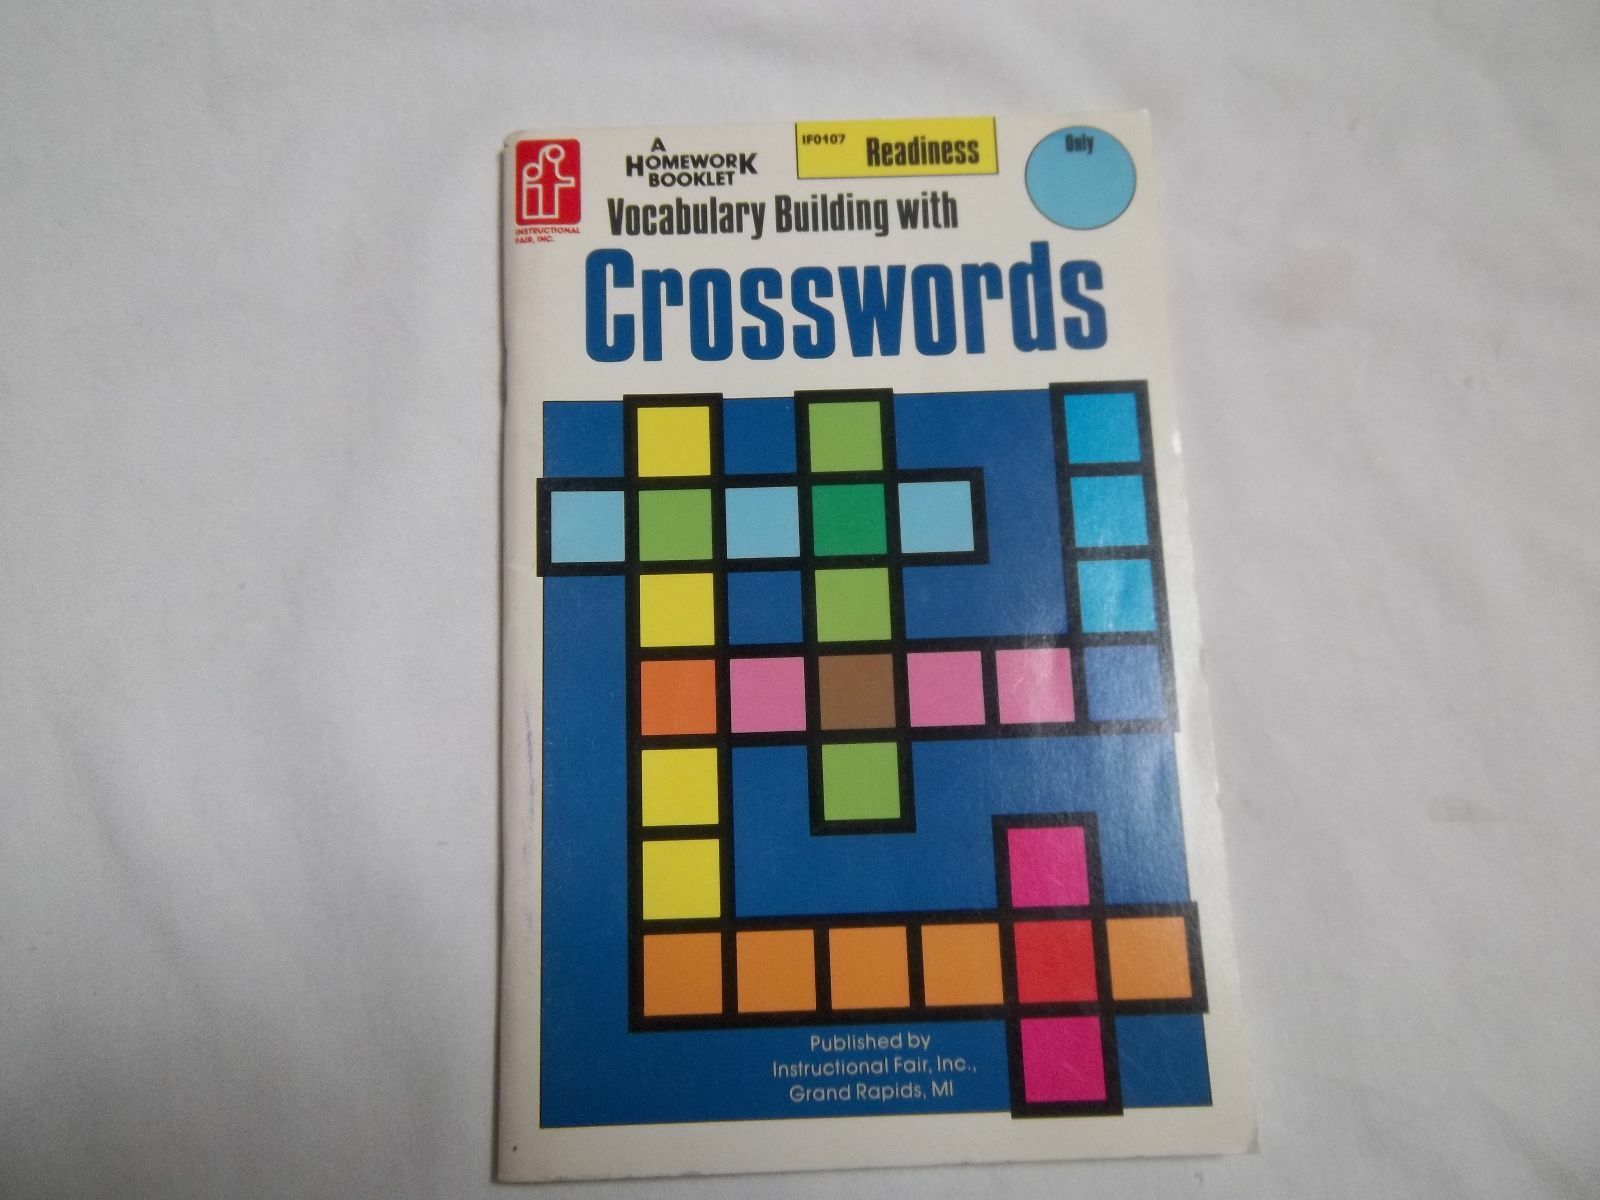 IF0107 VOCABULARY BUILDING WITH CROSSWORDS A HOMEWORK BOOKLET (PAPERBACK)